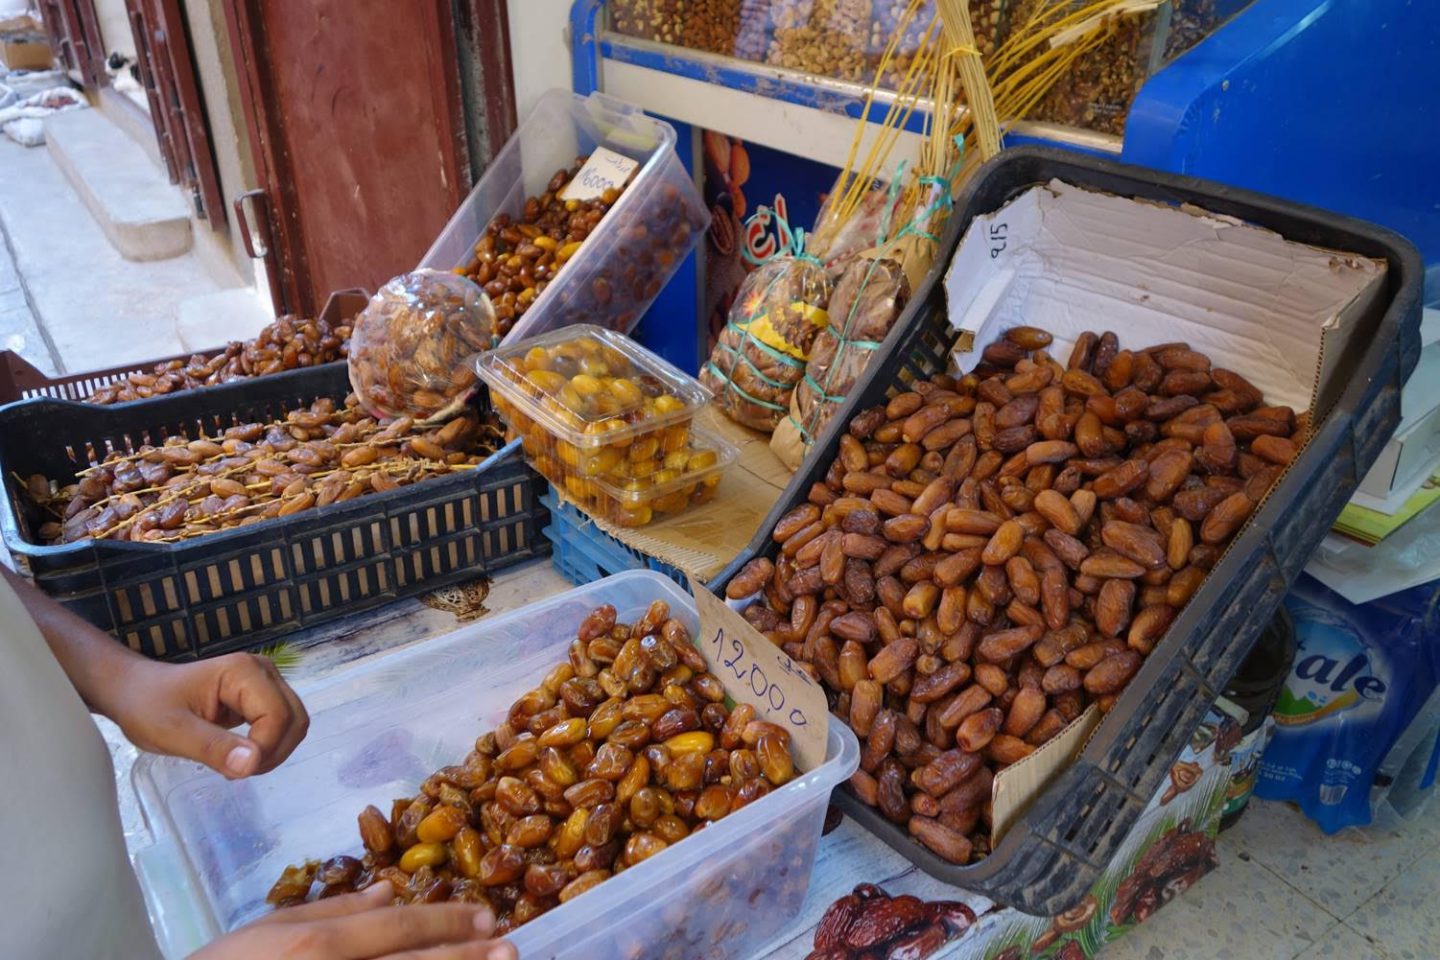 This Algerian entrepreneur turns unwanted dates into tasty treats | The Switchers